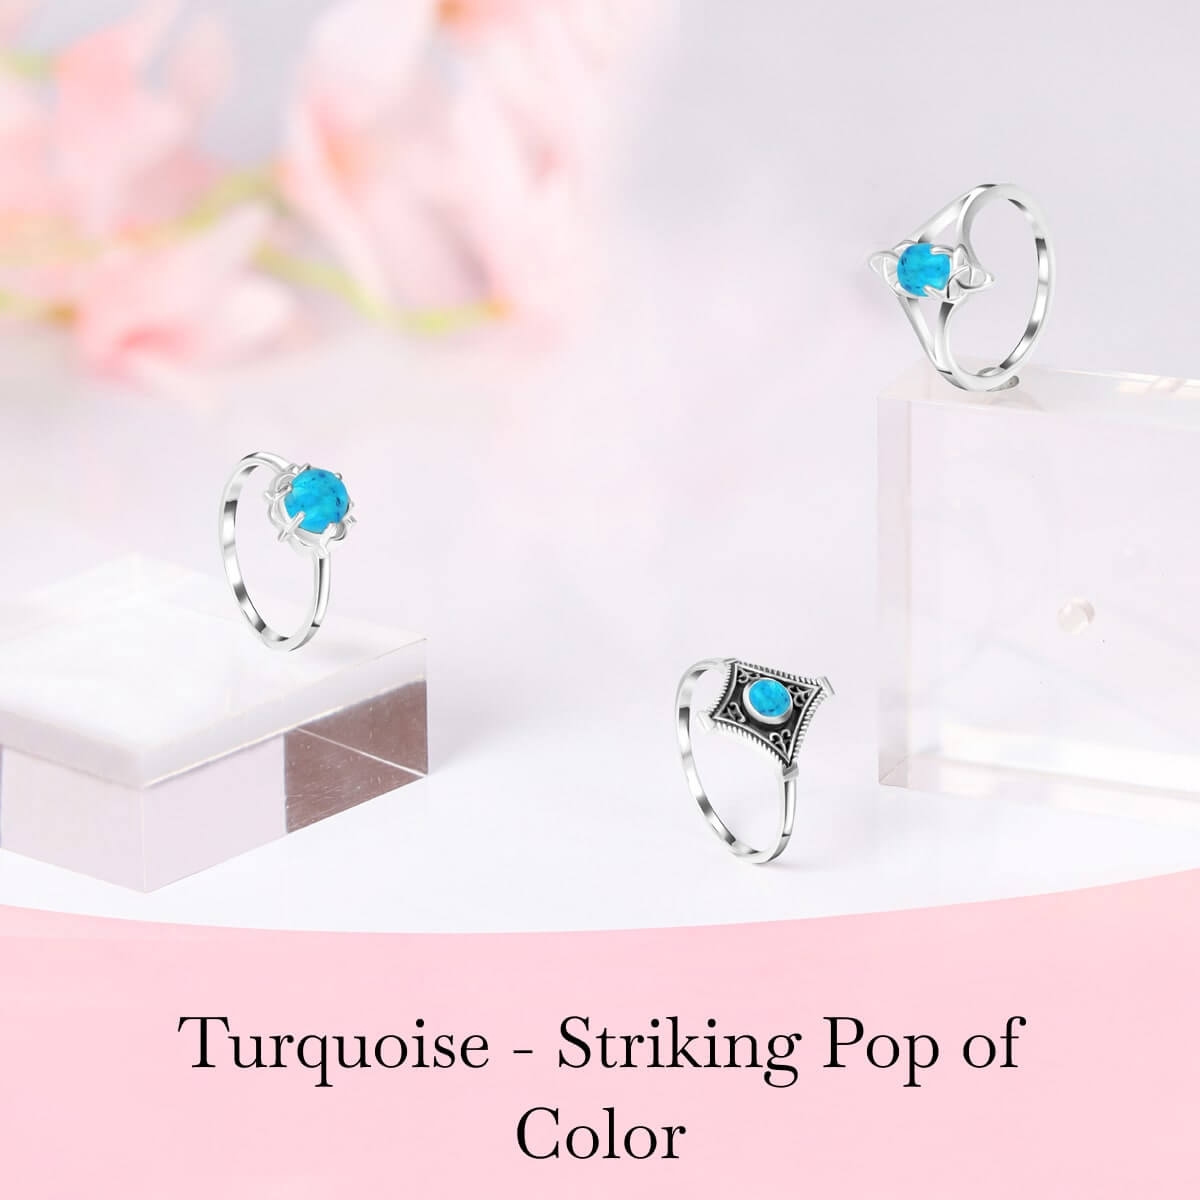 Turquoise Engagement Rings